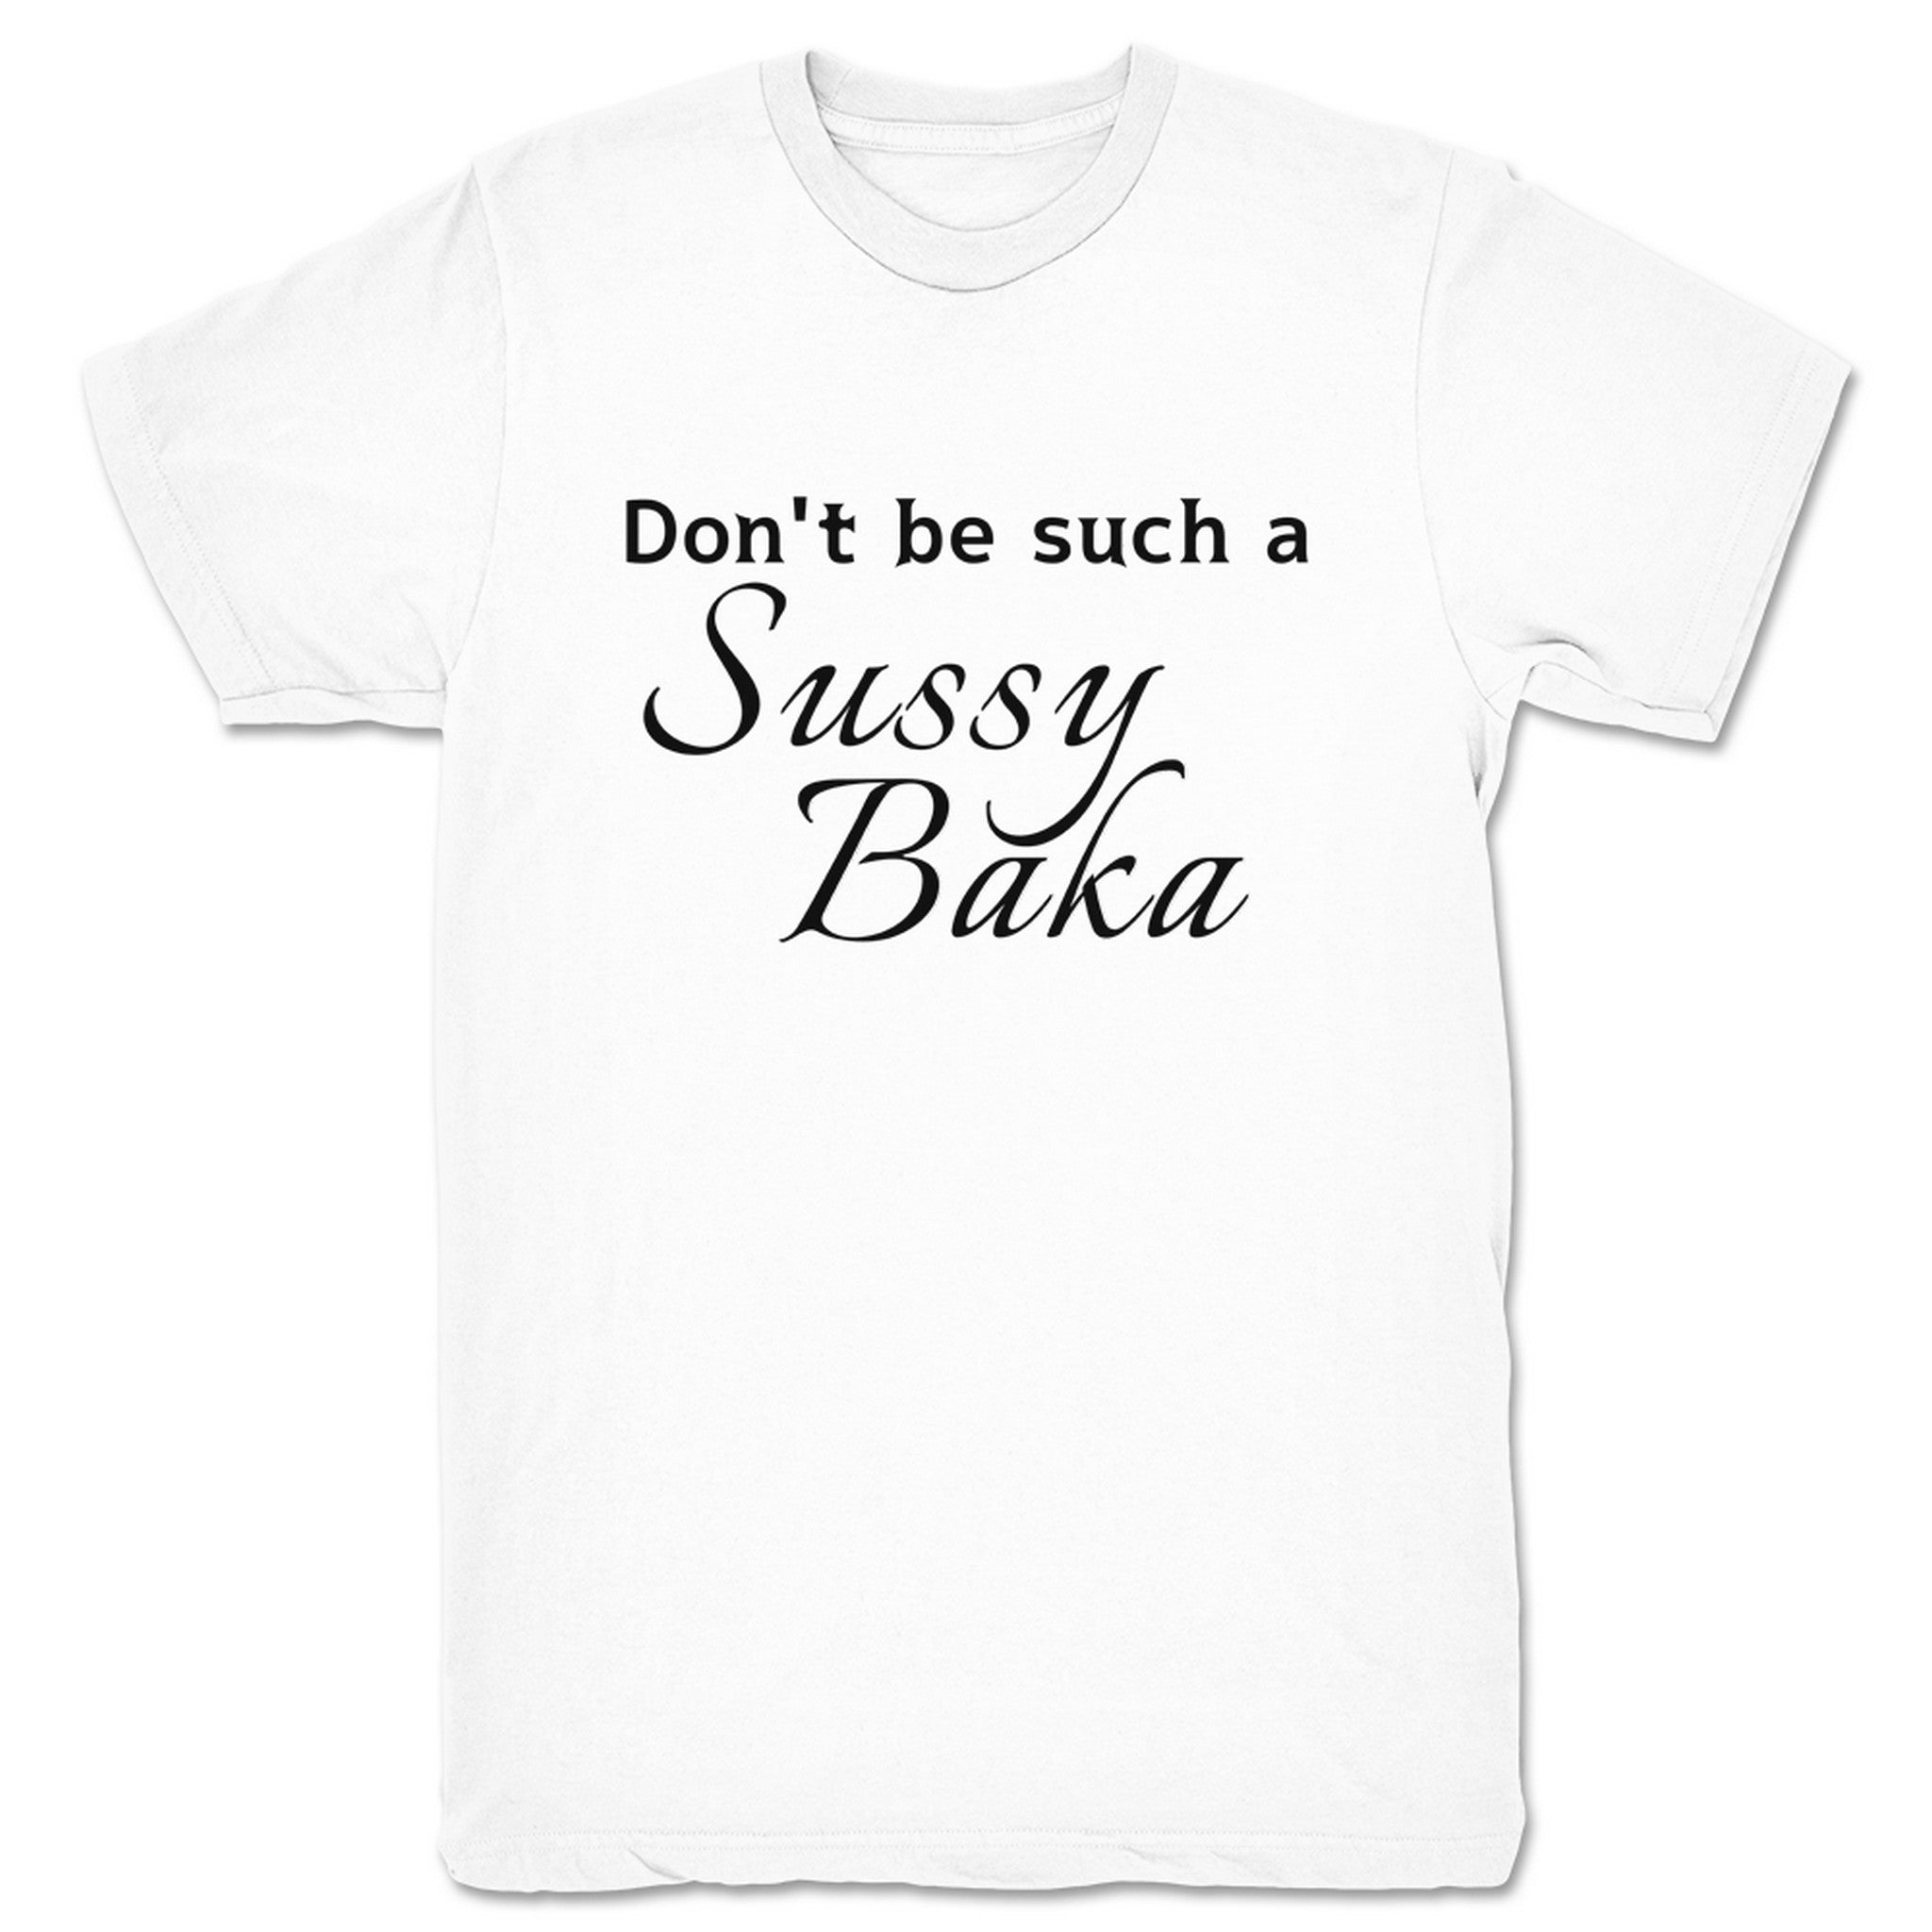 What is a sussy baka?